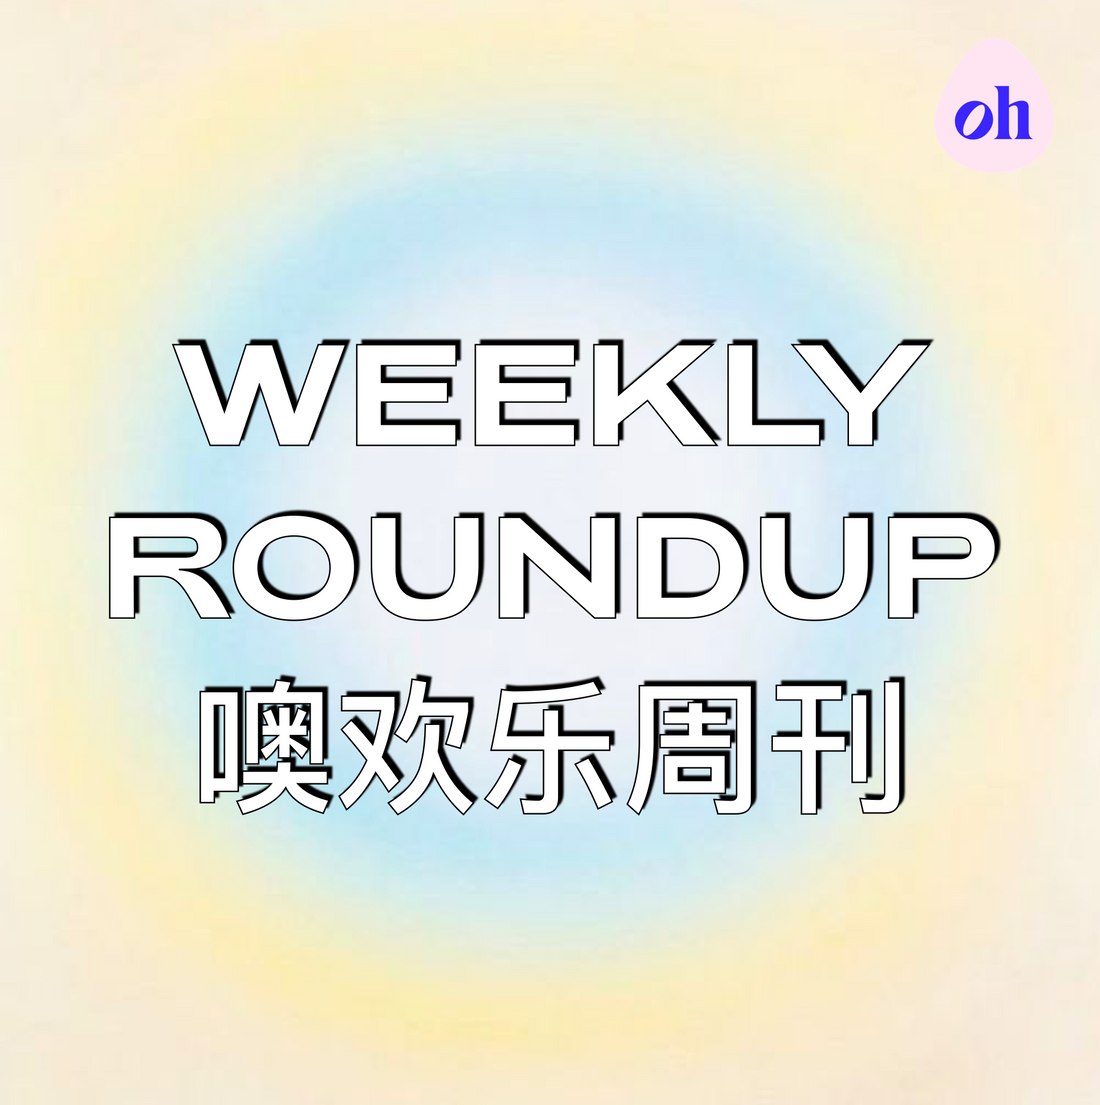 Weekly Roundup: Menstrubation, Lube and Porn stats